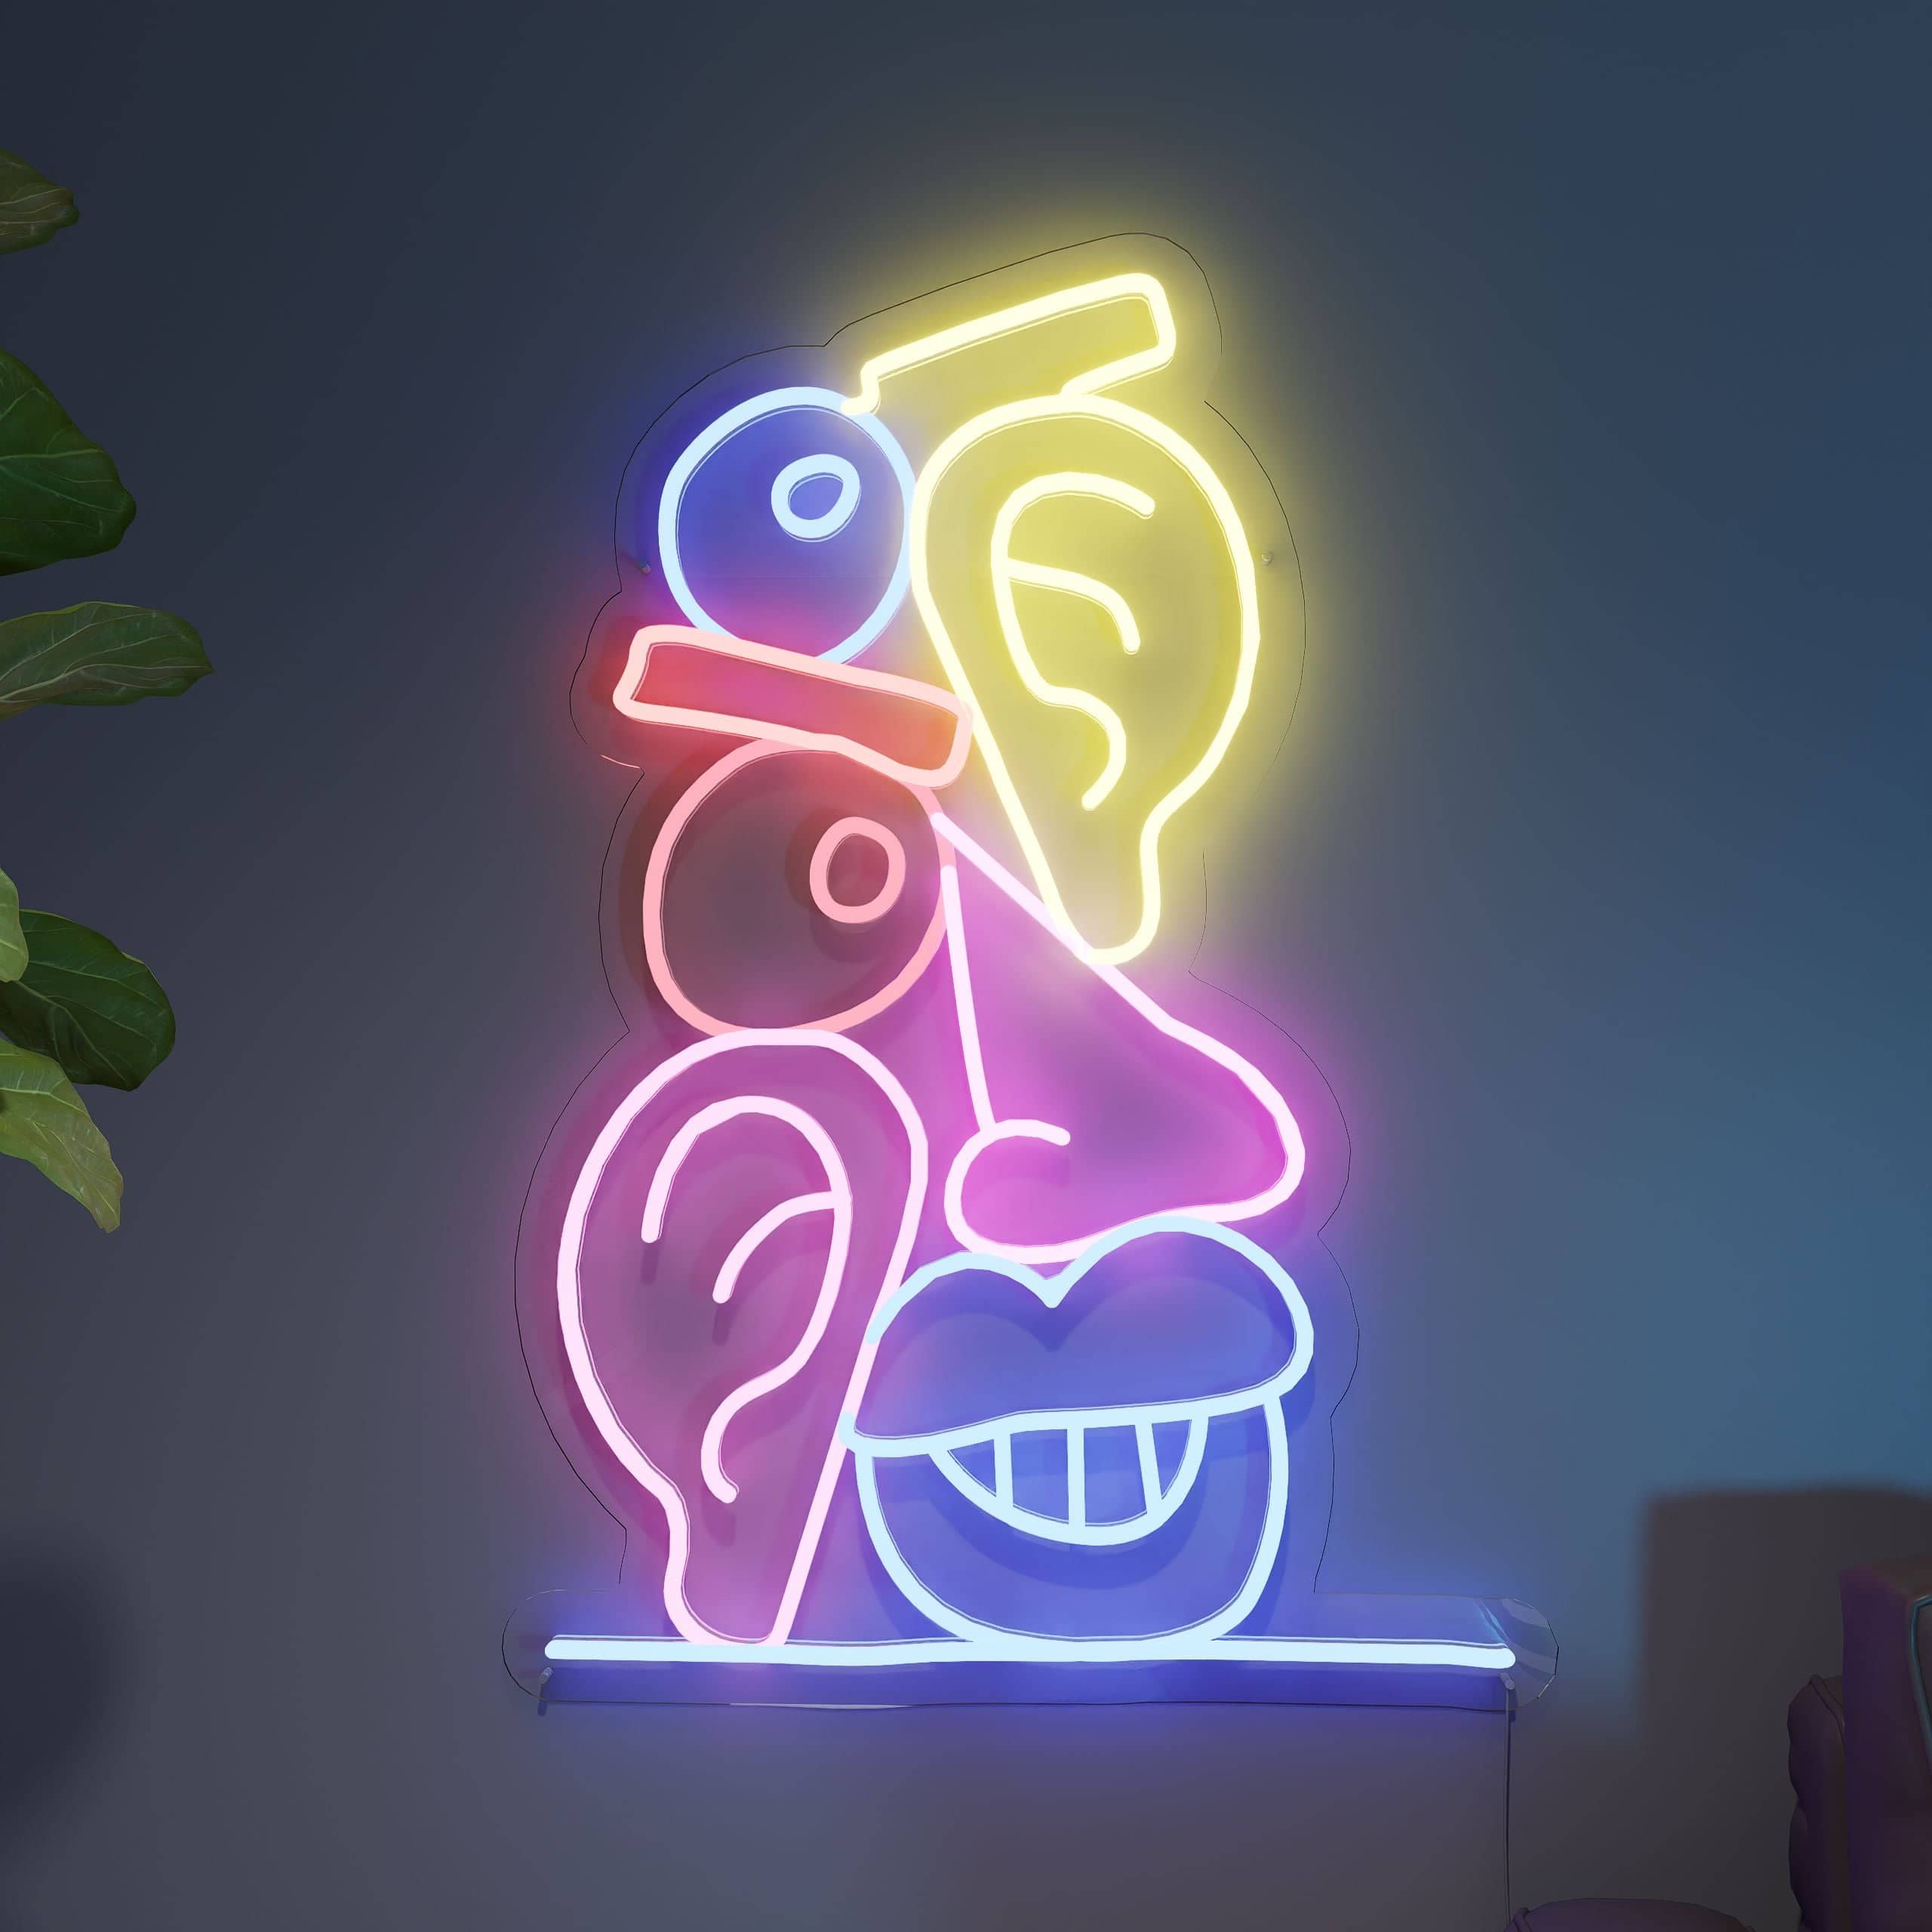 Open neon sign adds warmth to living spaces